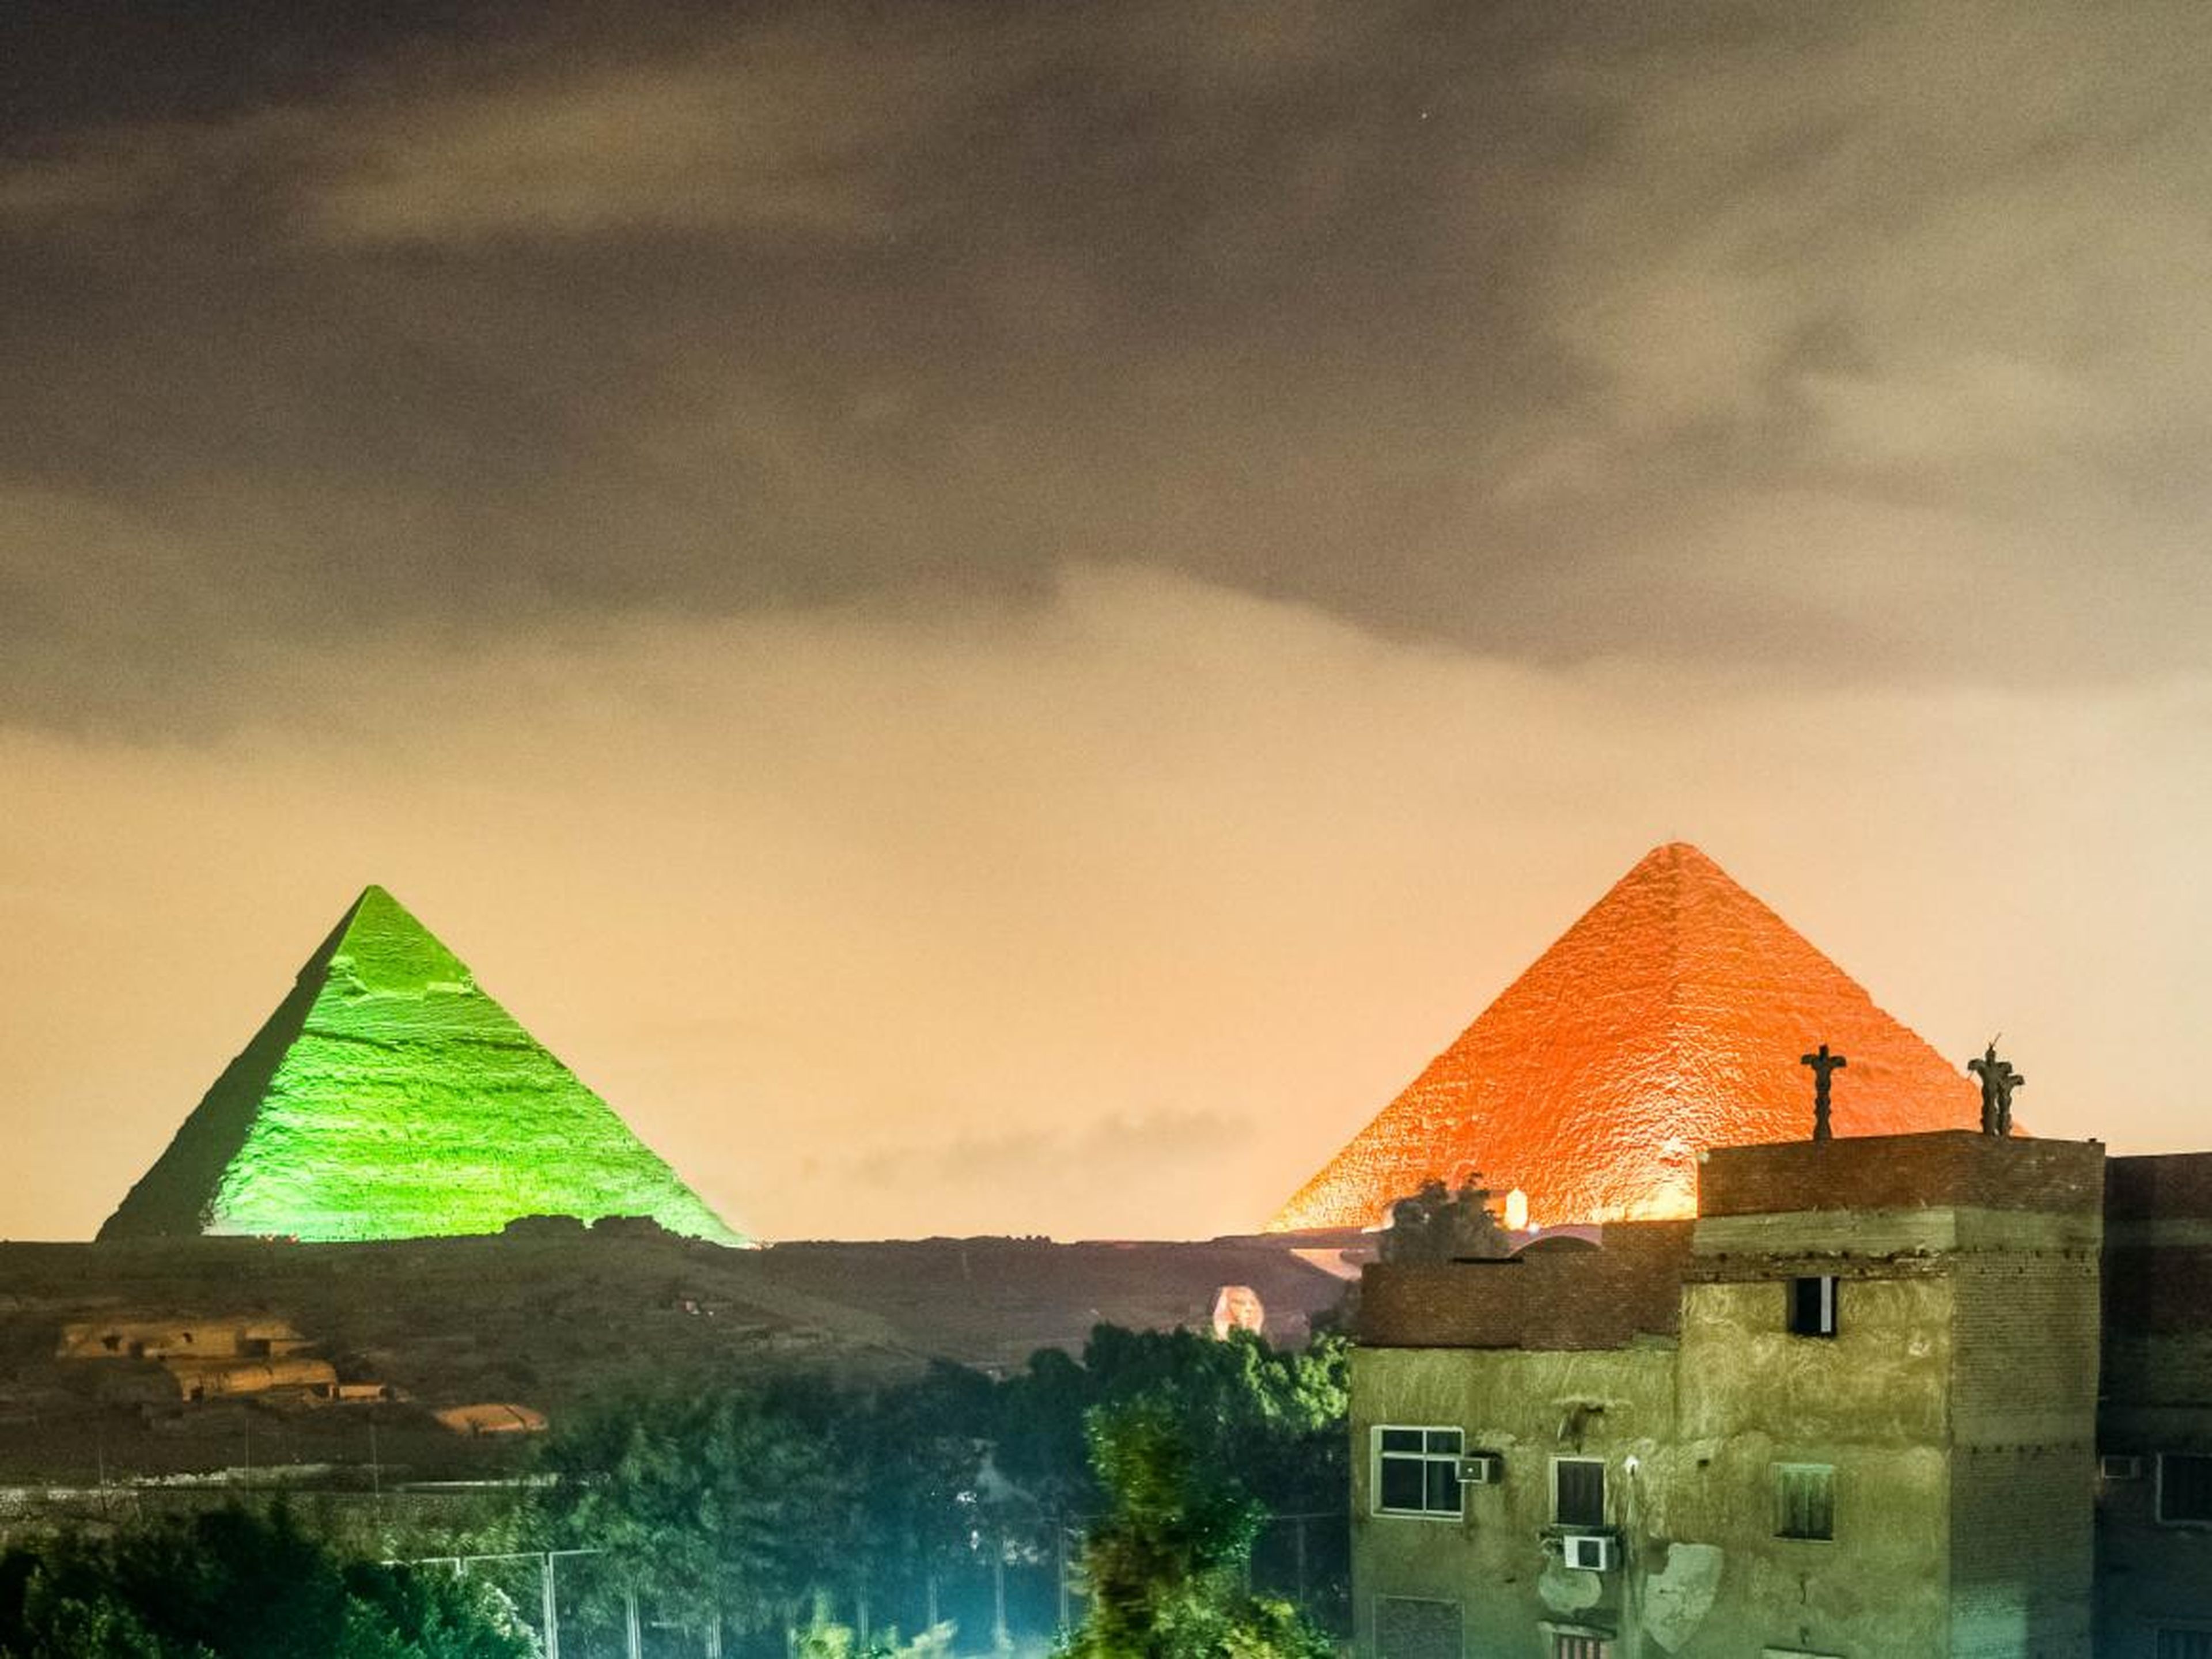 I stayed in the shadow of Egypt's iconic pyramids, and they're more surreal than any photos can show